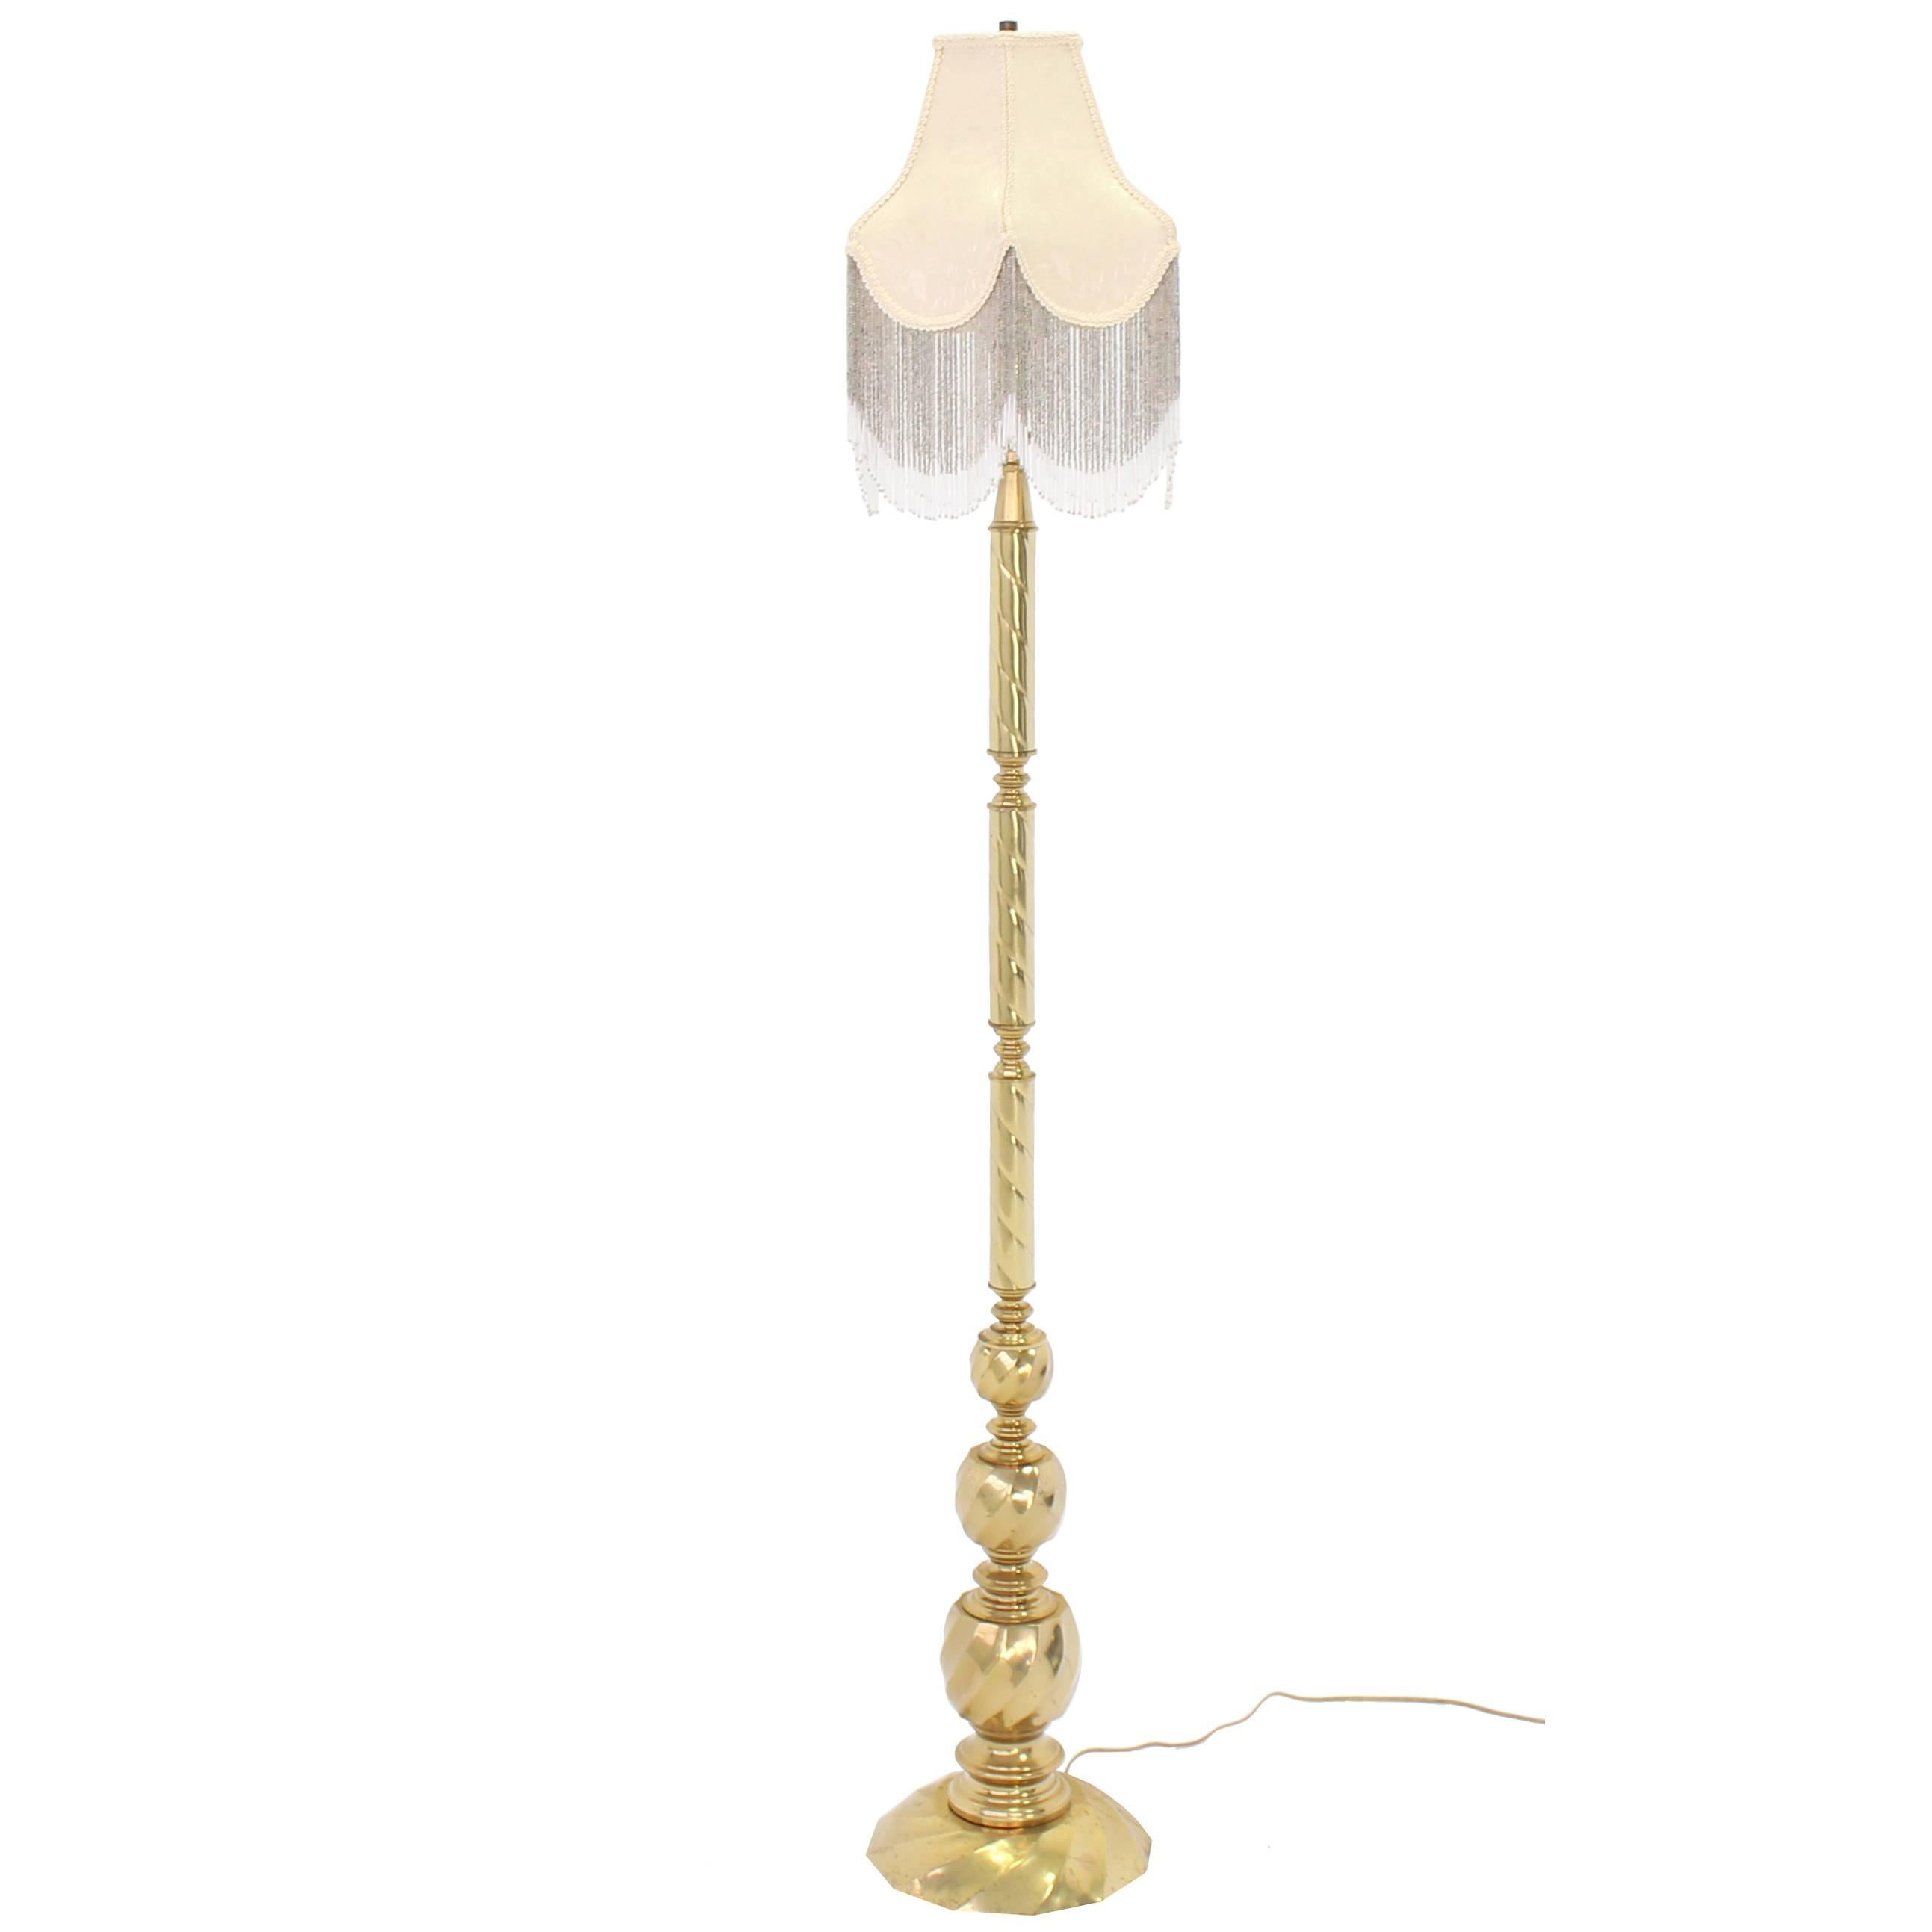 Vintage Brass Floor Lamp with Decorative Glass Beads Shade For Sale